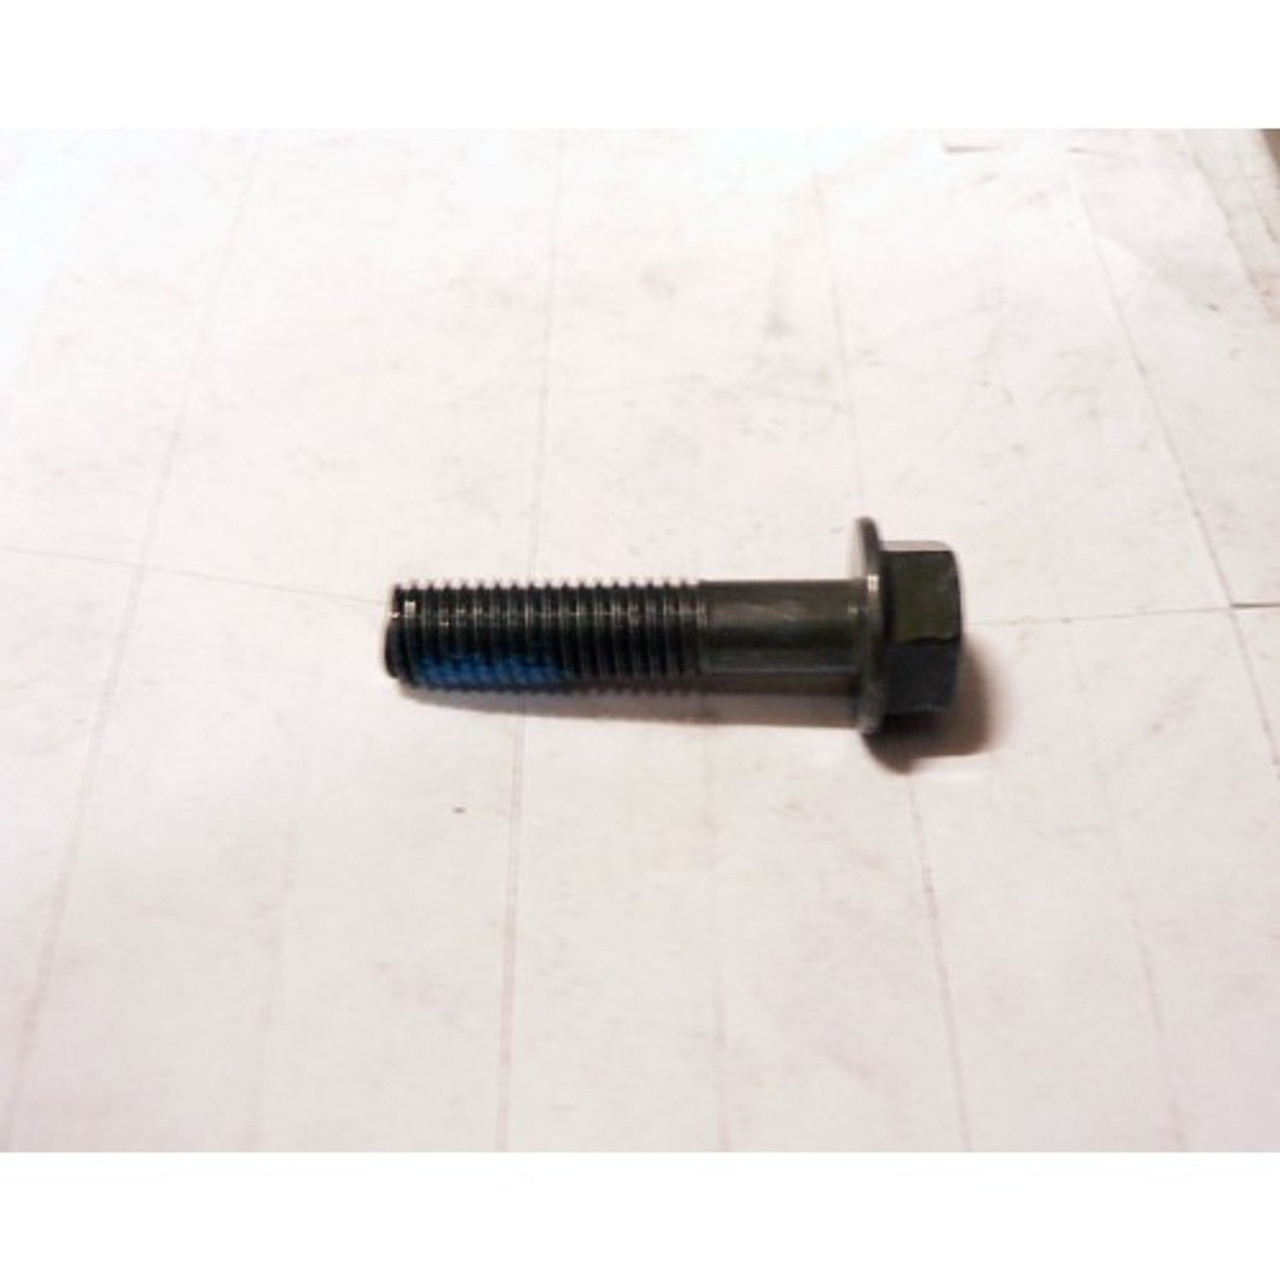 (#9) Hex Washer Face Bolt, M8x35